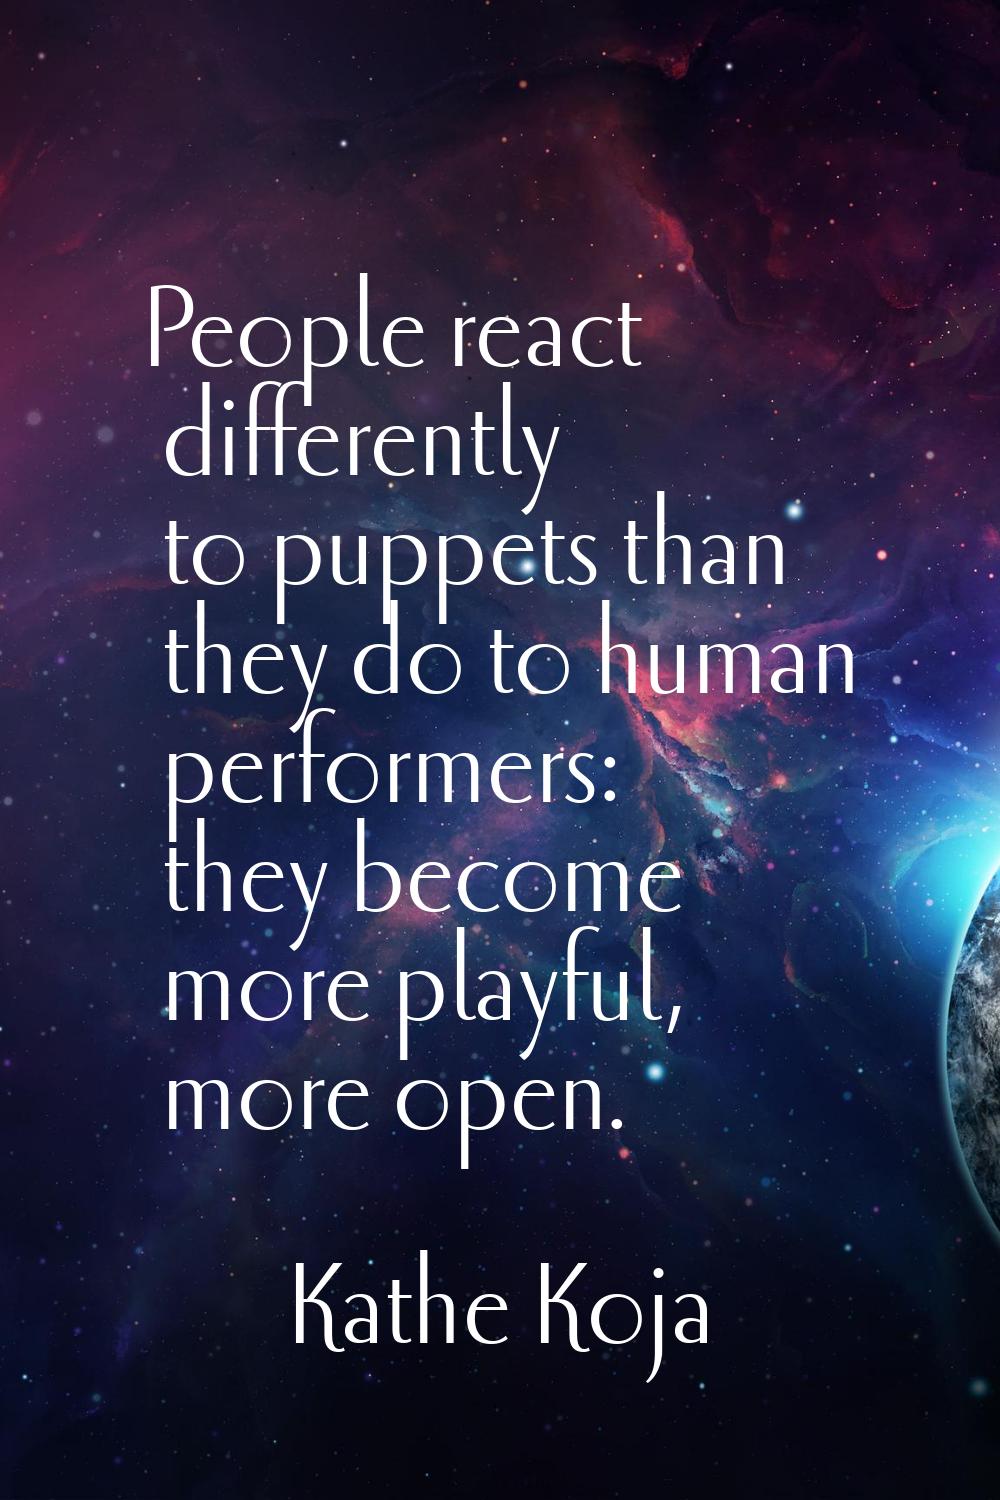 People react differently to puppets than they do to human performers: they become more playful, mor